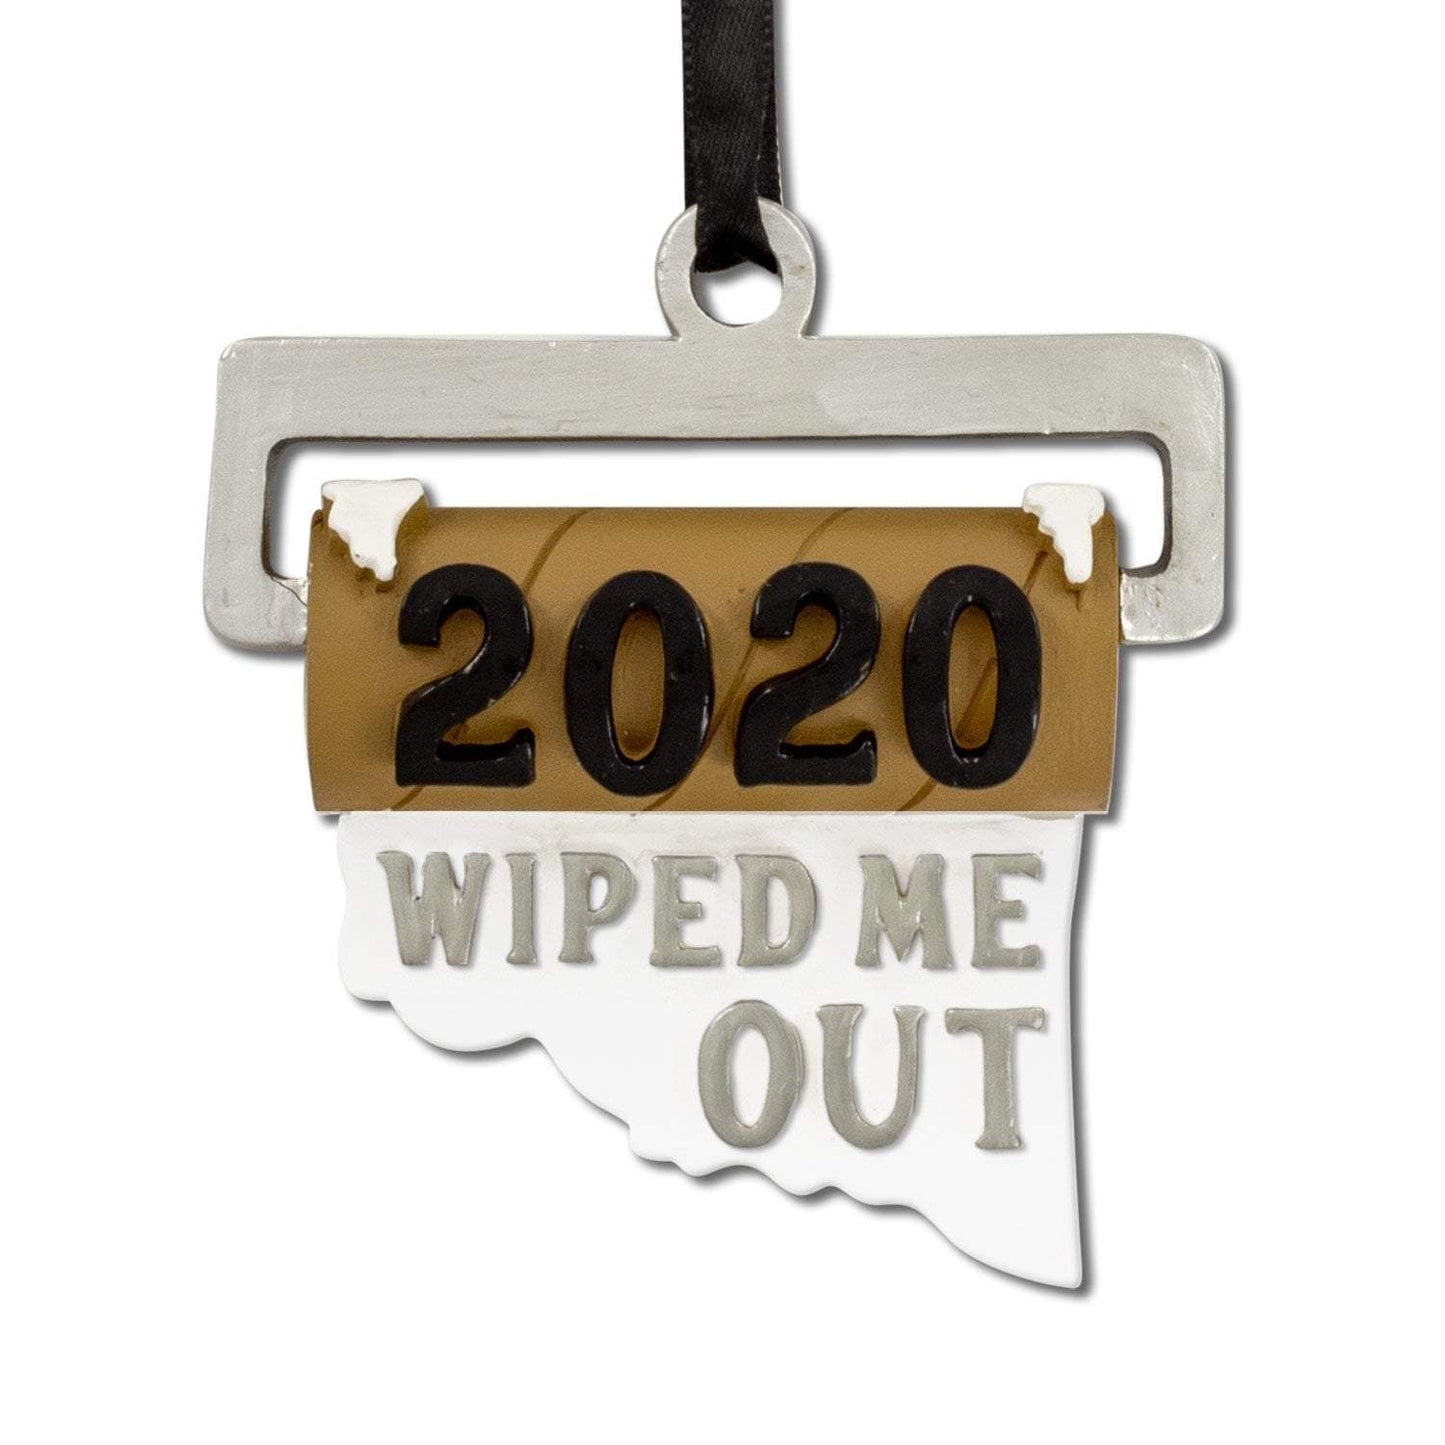 2020 Wiped Me Out Resin Ornament - Chowdaheadz